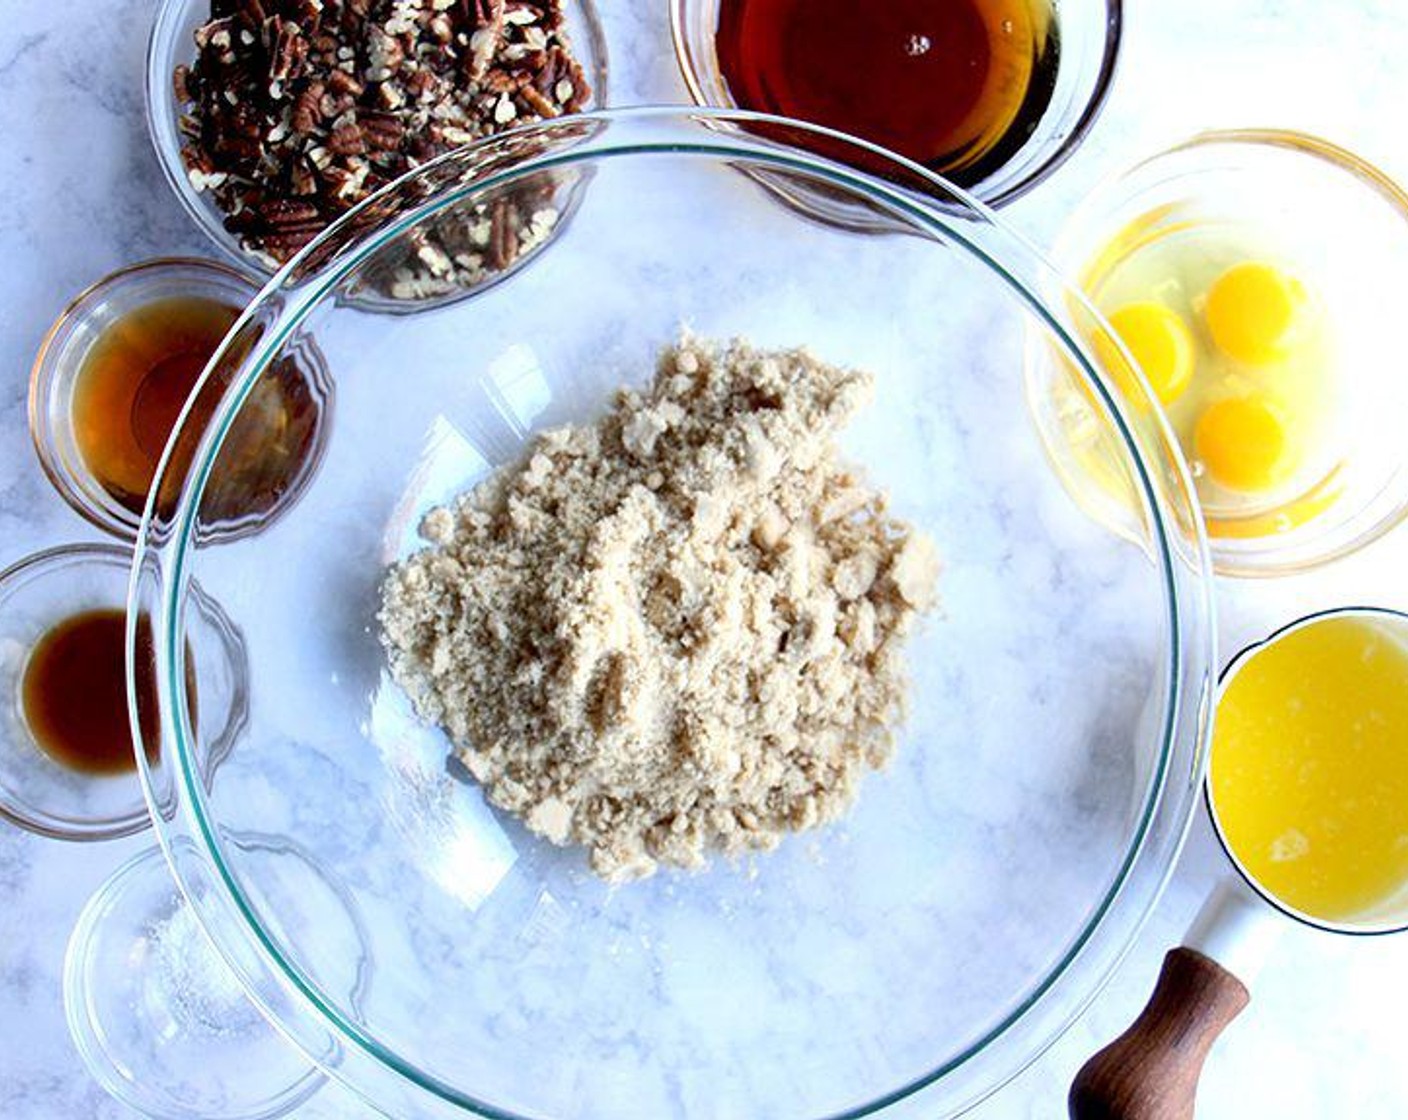 step 6 To make the filling, in a large bowl, whisk together the Dark Brown Sugar (1 cup), Maple Syrup (1/2 cup), Farmhouse Eggs® Large Brown Eggs (3), Butter (1/4 cup), Bourbon (3 Tbsp), Vanilla Extract (1 tsp), and Salt (1/4 tsp). Stir in the Roasted Pecans (2 cups).